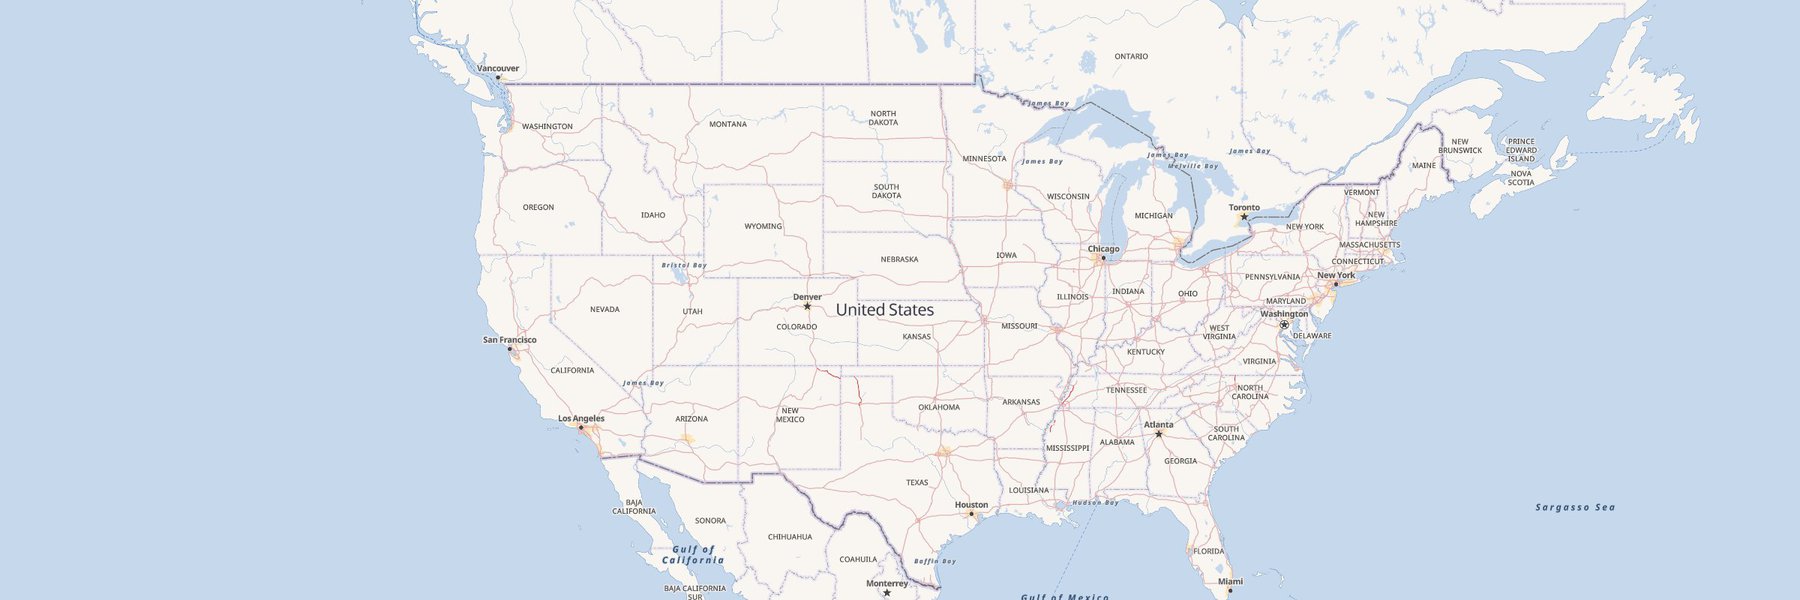 A clean looking map of the continental United States.